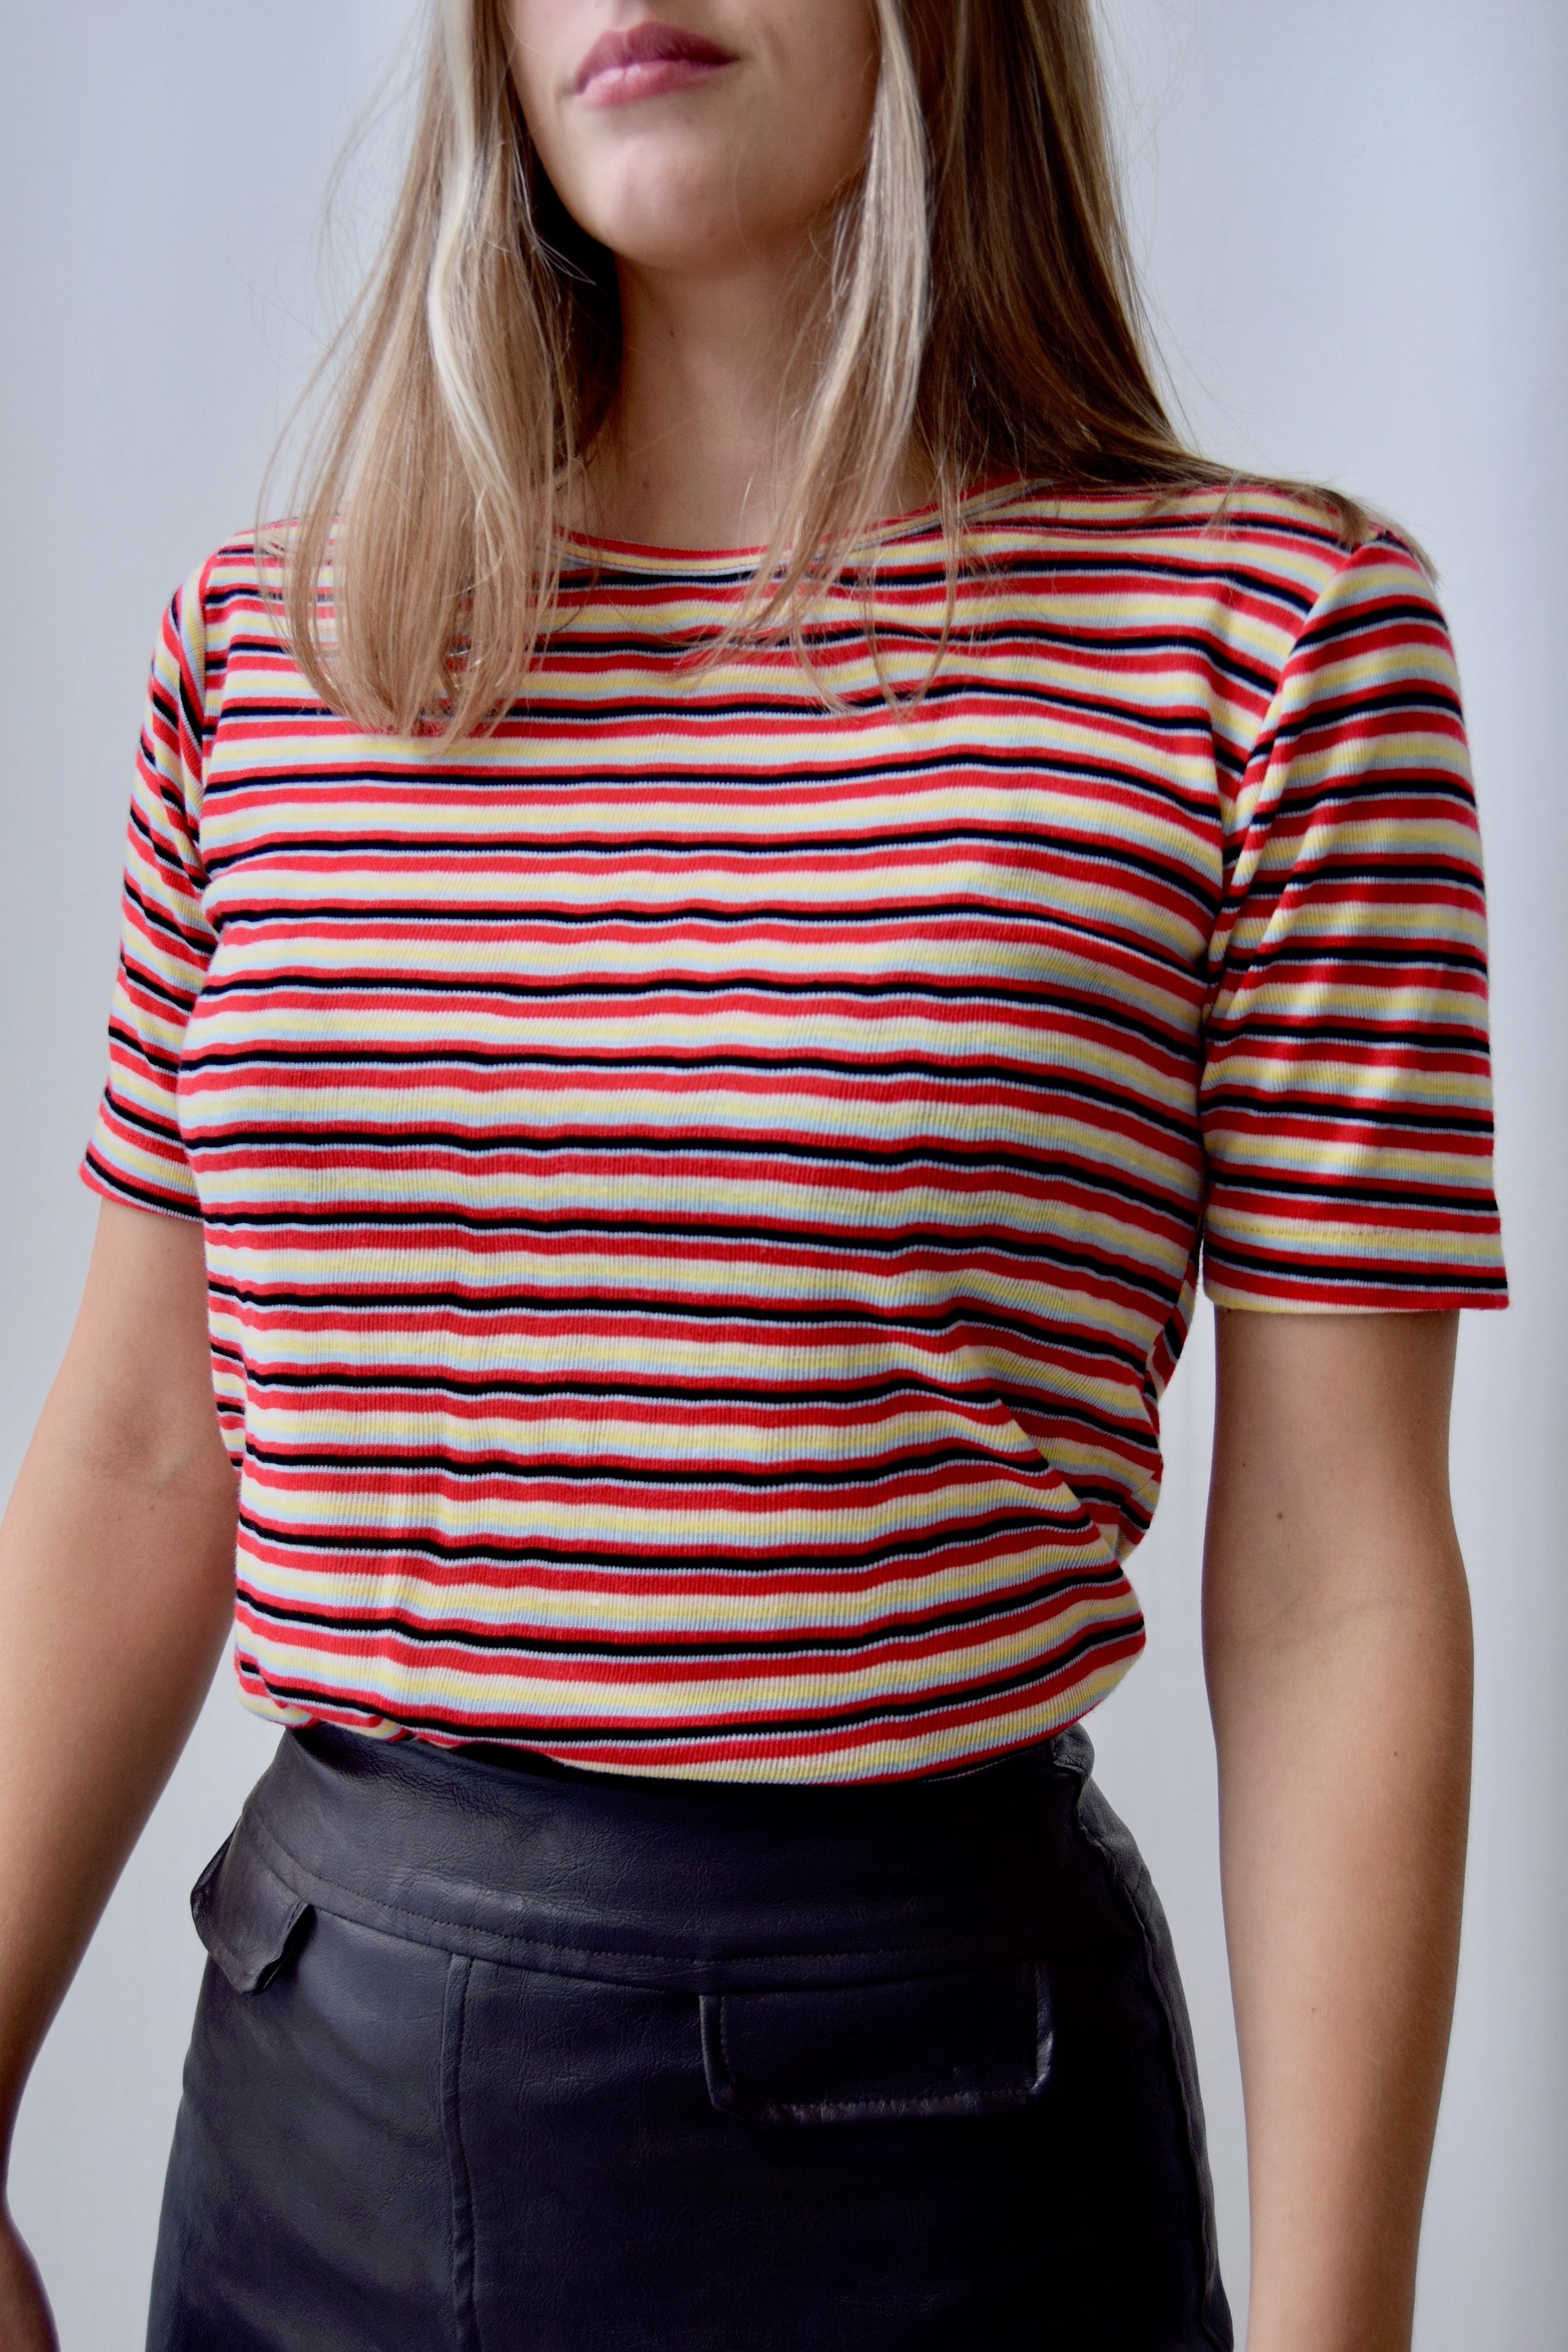 Vintage Striped Acrylic Knit Tee Top